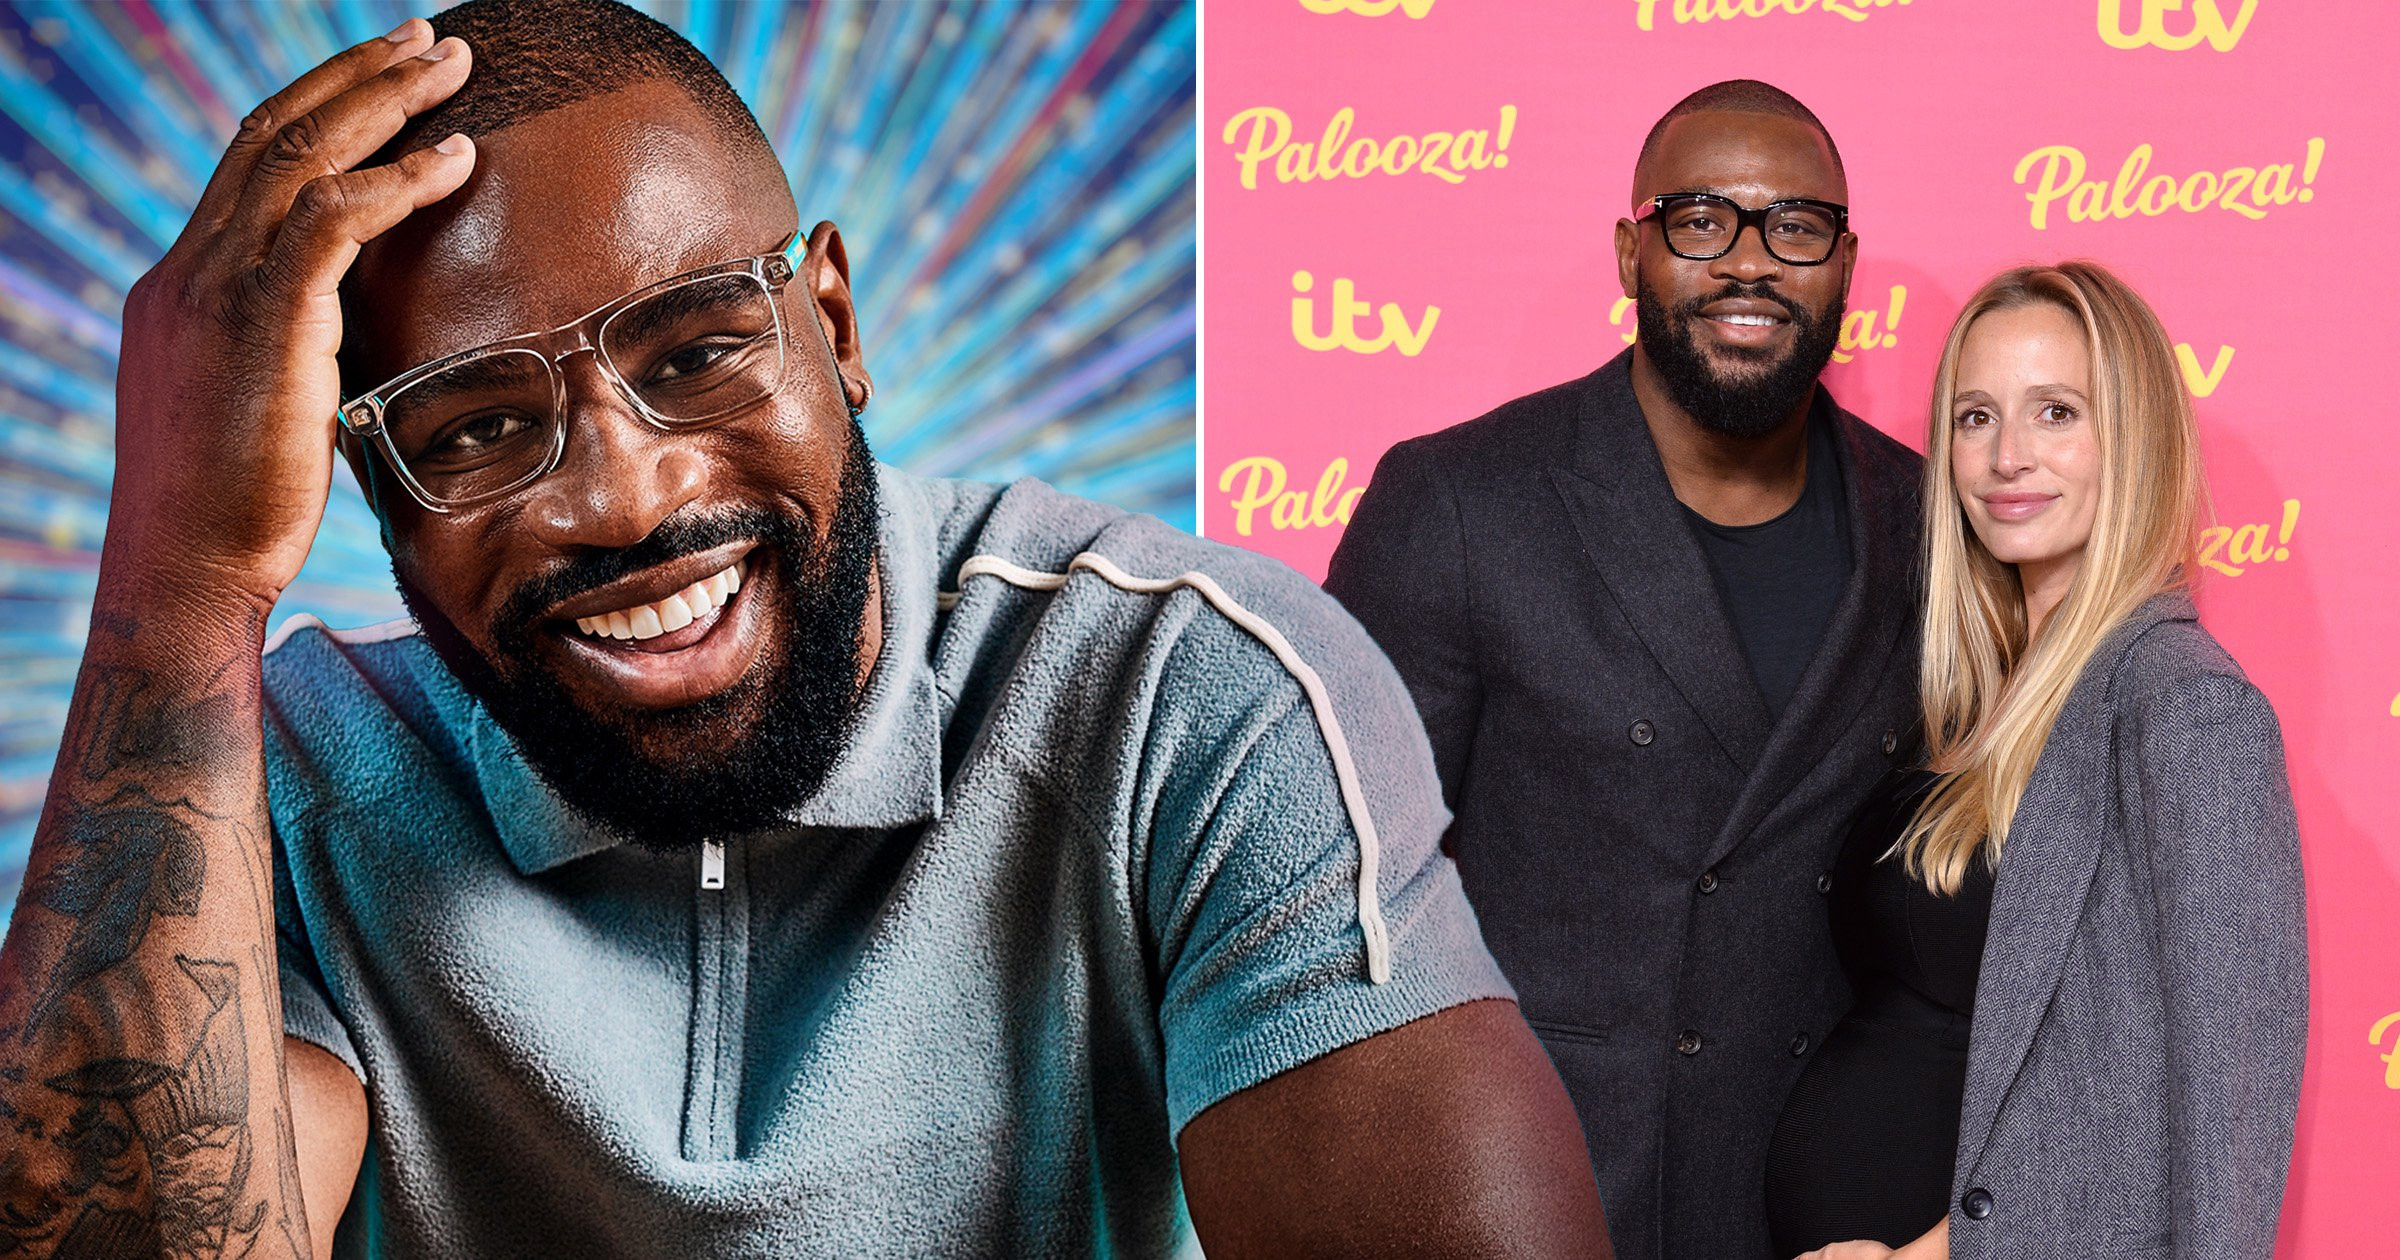 Strictly Come Dancing 2021’s Ugo Monye confirms split from wife just days’ before show launch